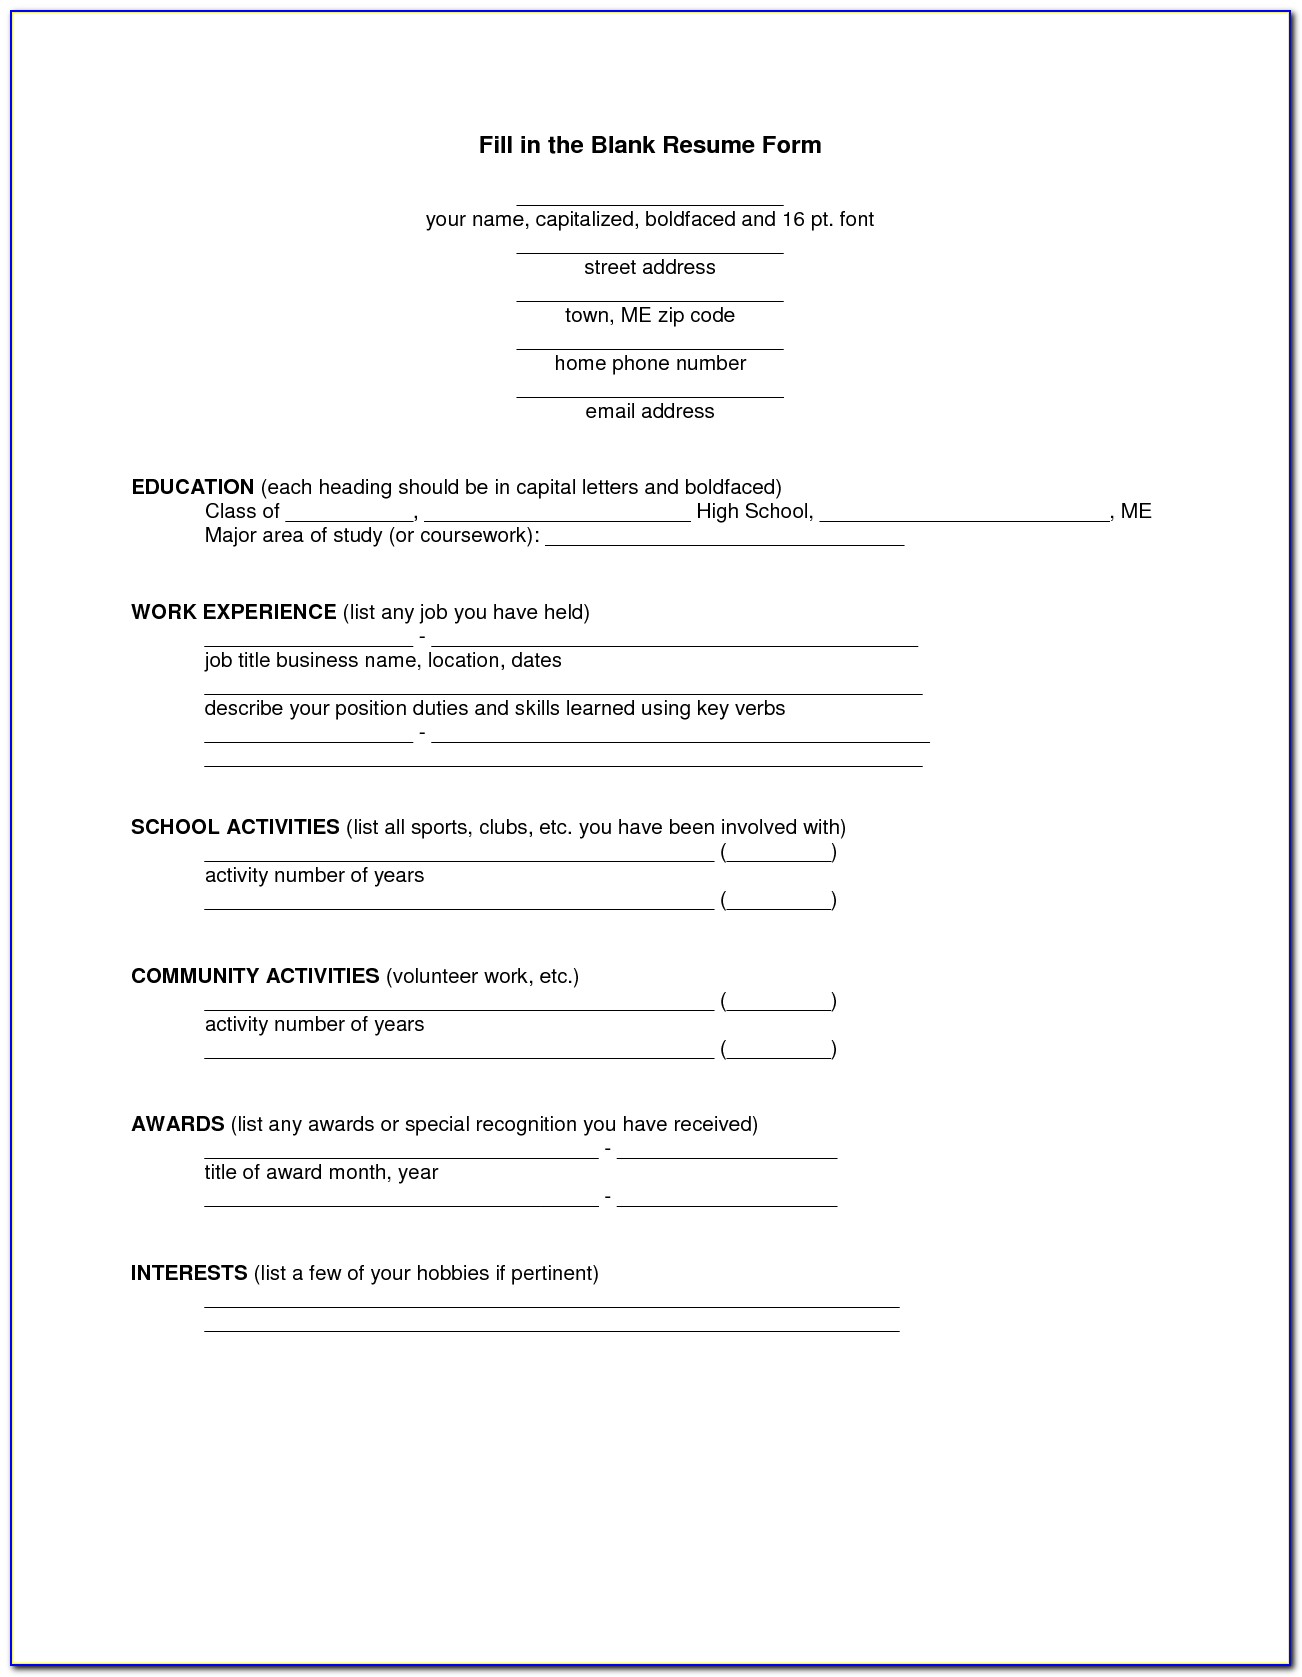 How To Fill Out A Resume For A Job